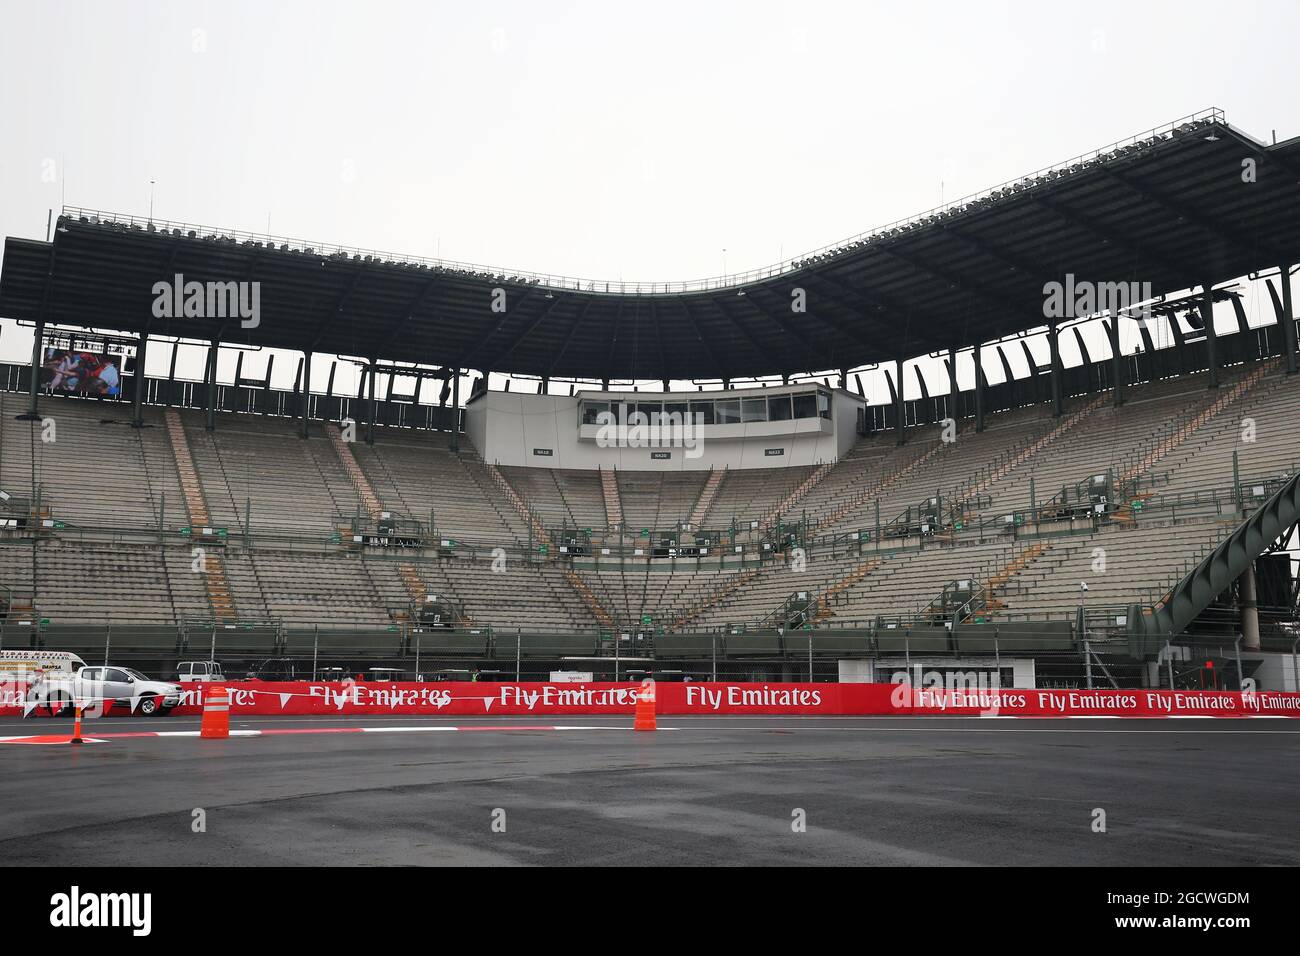 The stadium section. Mexican Grand Prix, Wednesday 28th October 2015. Mexico City, Mexico. Stock Photo